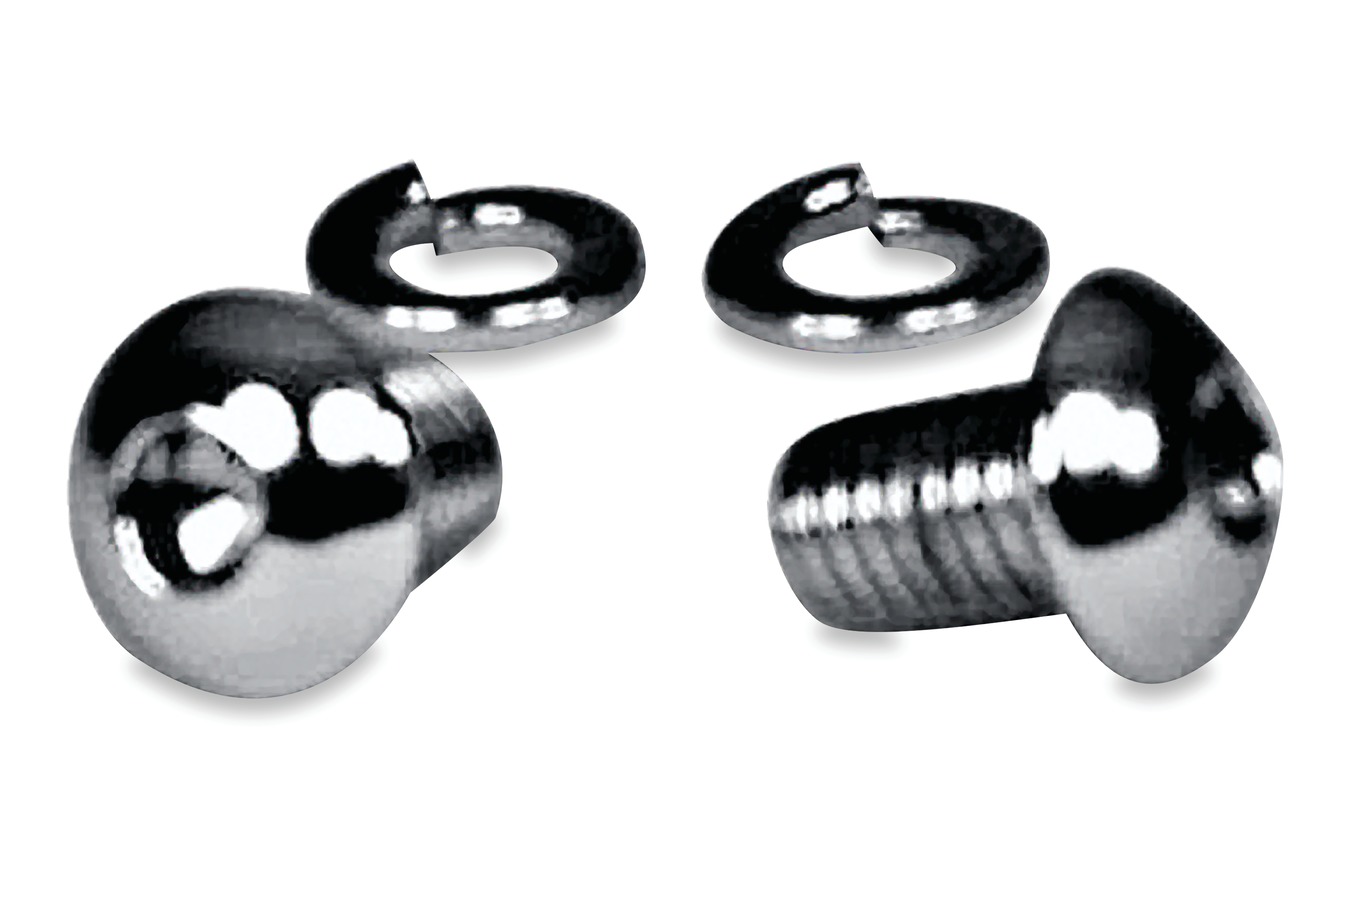 Solo Seat Side Mount Bolts, 1/2-13 coarse thread (pair)